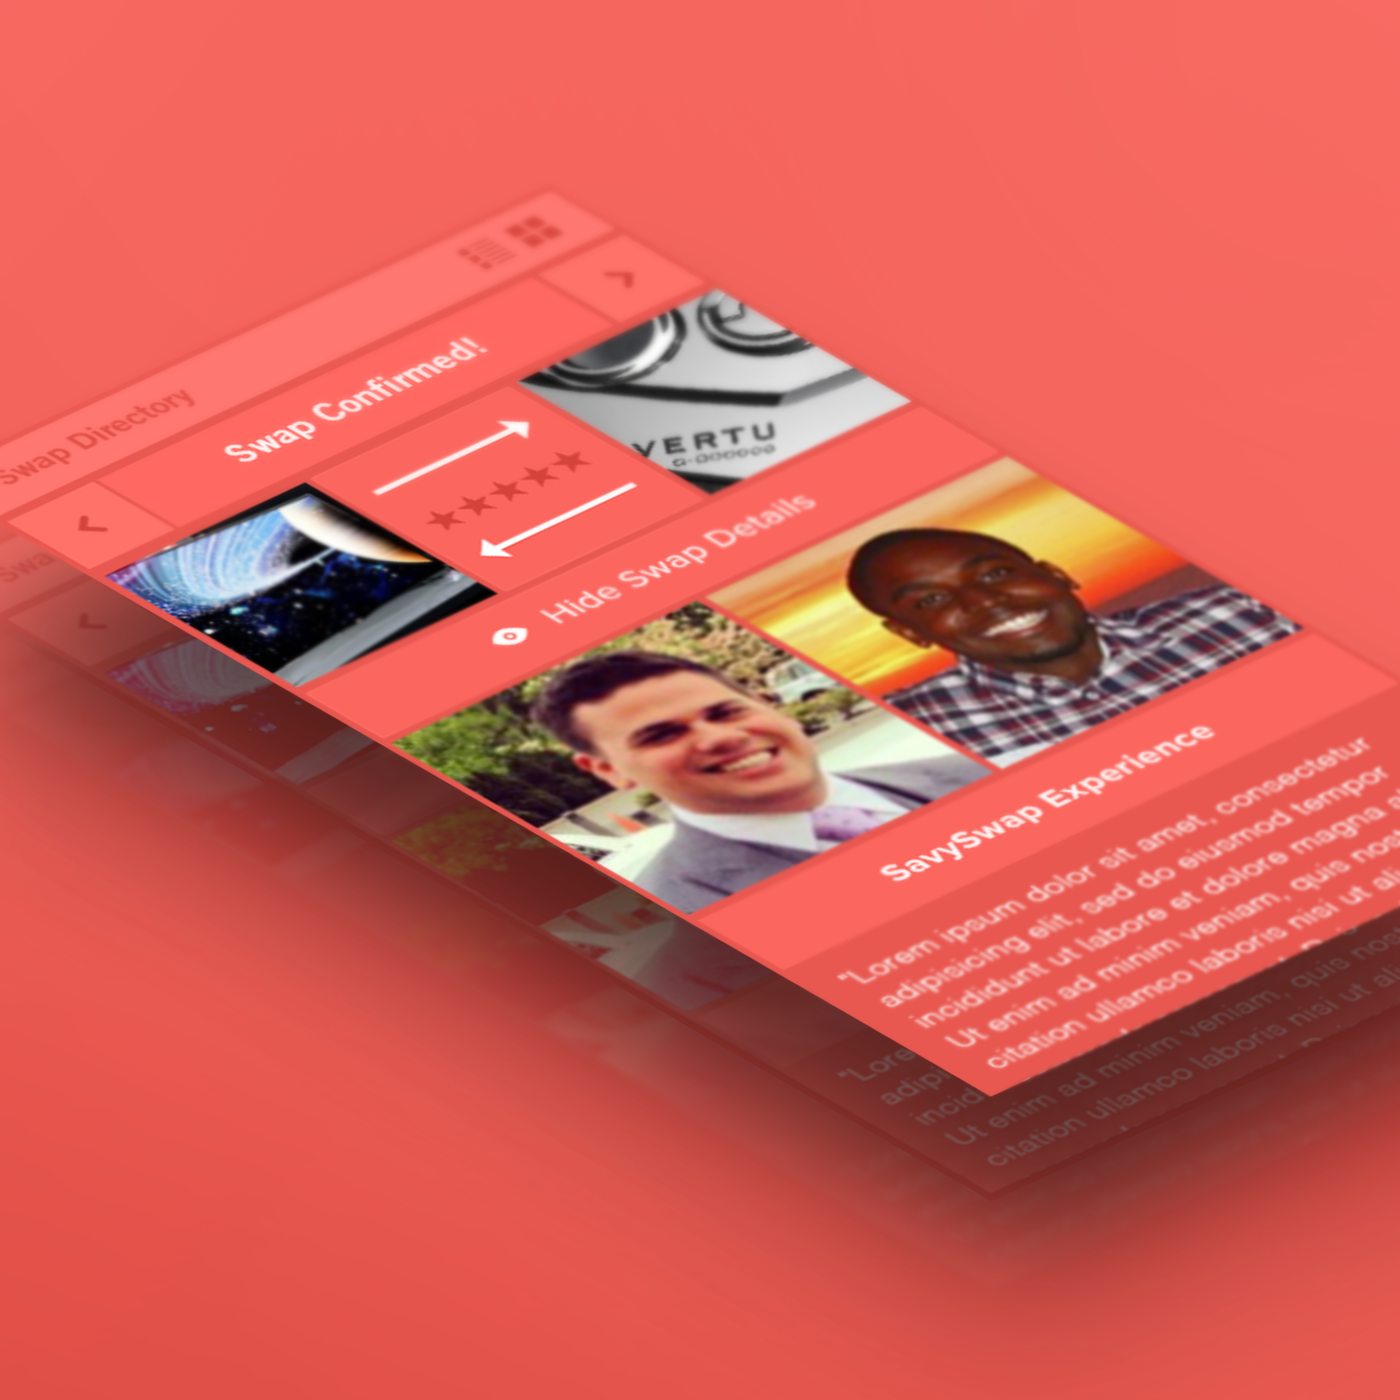 Responsive web design user interface user experience product ux/ui